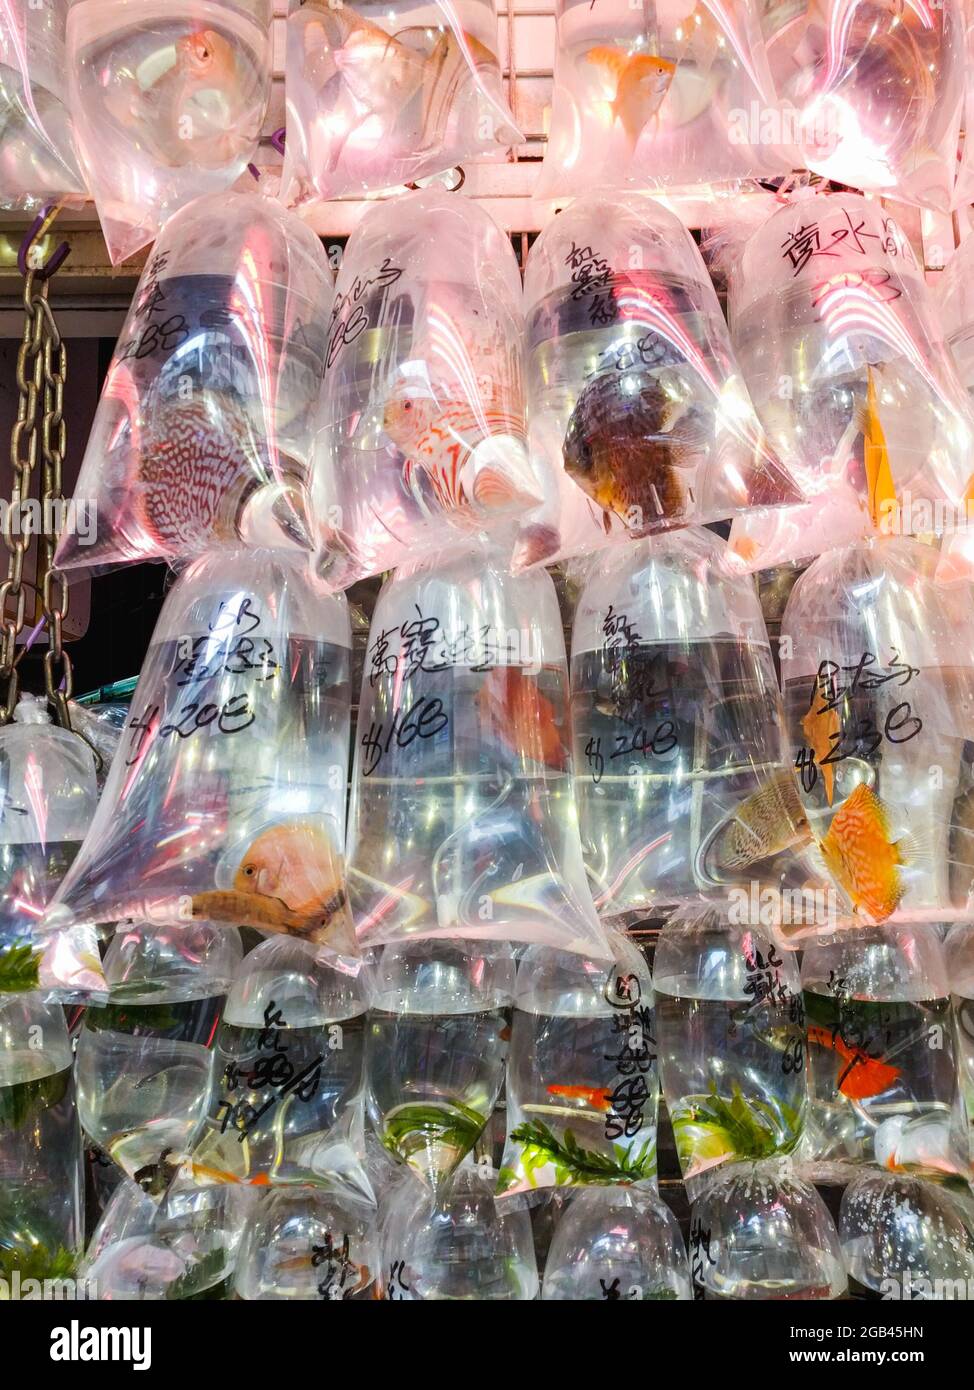 Colourful fish in bags at a pet shop in Hong Kong Stock Photo